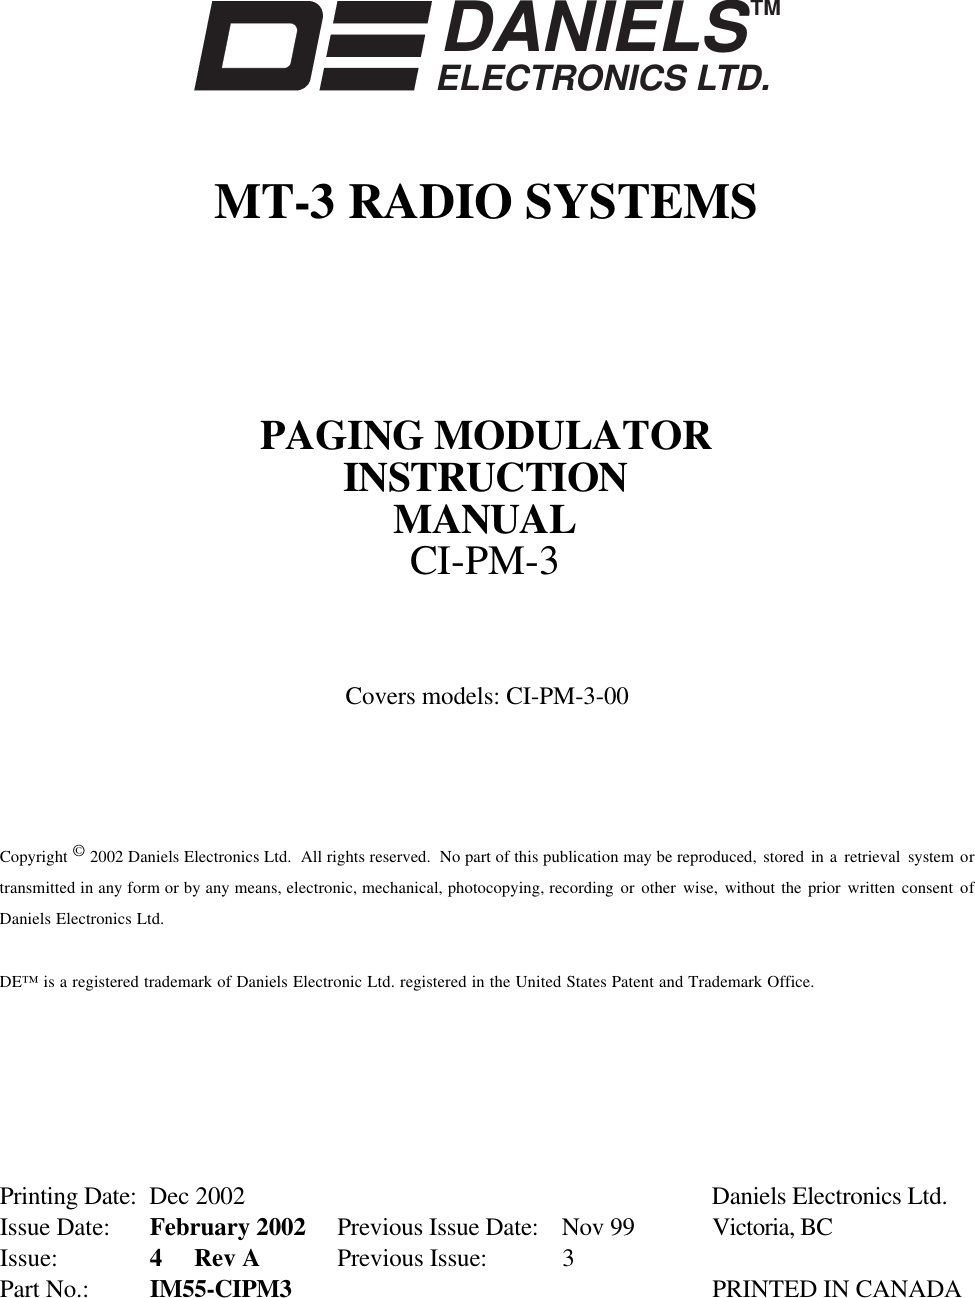 DANIELSELECTRONICS LTD.TMMT-3 RADIO SYSTEMSPAGING MODULATORINSTRUCTIONMANUALCI-PM-3Covers models: CI-PM-3-00Copyright © 2002 Daniels Electronics Ltd.  All rights reserved.  No part of this publication may be reproduced, stored in a retrieval  system ortransmitted in any form or by any means, electronic, mechanical, photocopying, recording or other wise, without the prior written consent ofDaniels Electronics Ltd.DE™ is a registered trademark of Daniels Electronic Ltd. registered in the United States Patent and Trademark Office.Printing Date: Dec 2002 Daniels Electronics Ltd.Issue Date: February 2002 Previous Issue Date: Nov 99 Victoria, BCIssue: 4     Rev A Previous Issue:  3Part No.: IM55-CIPM3   PRINTED IN CANADA